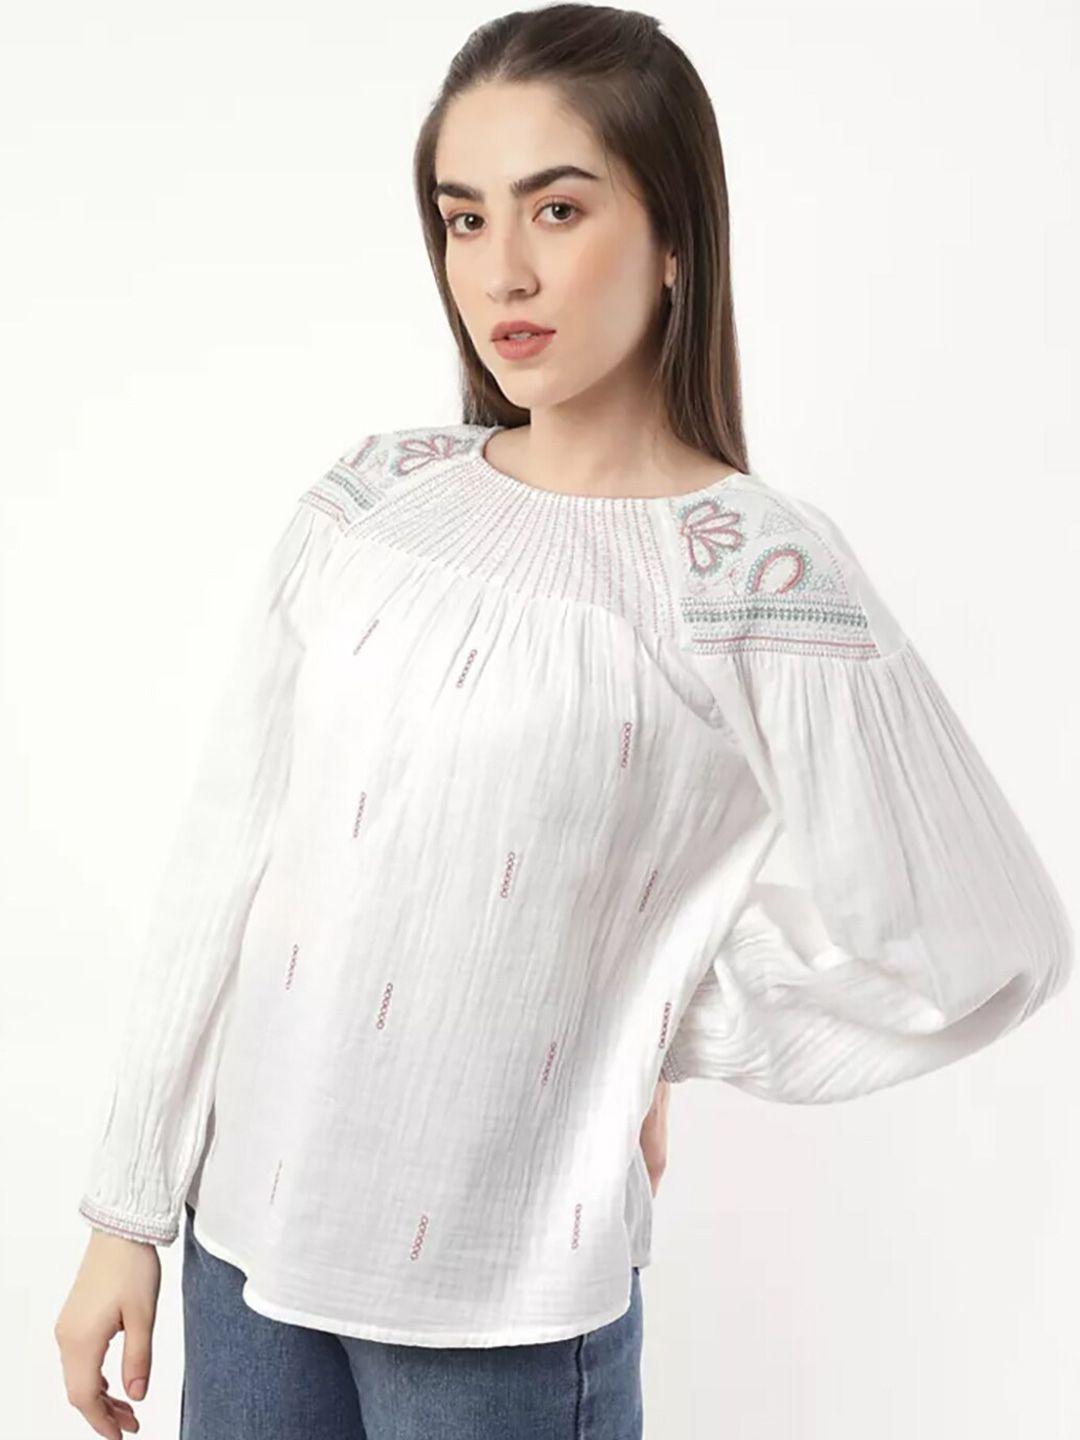 marks-&-spencer-women-soft-white-embroidered-top